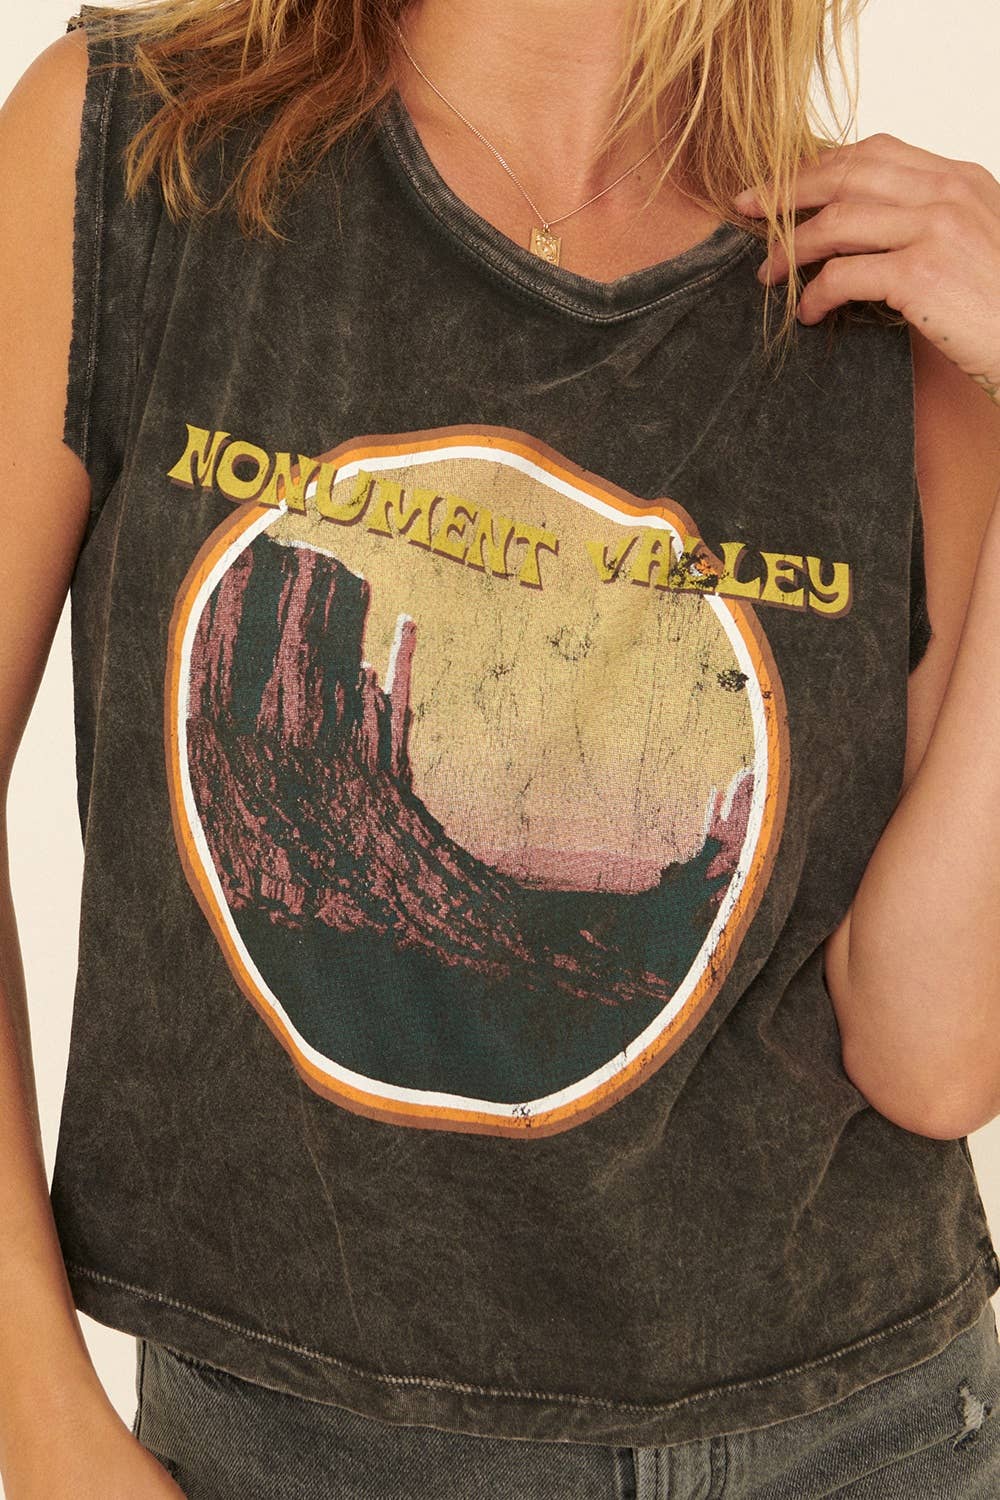 Sale Mineral-Washed Sleeveless "Monument Valley" Tee